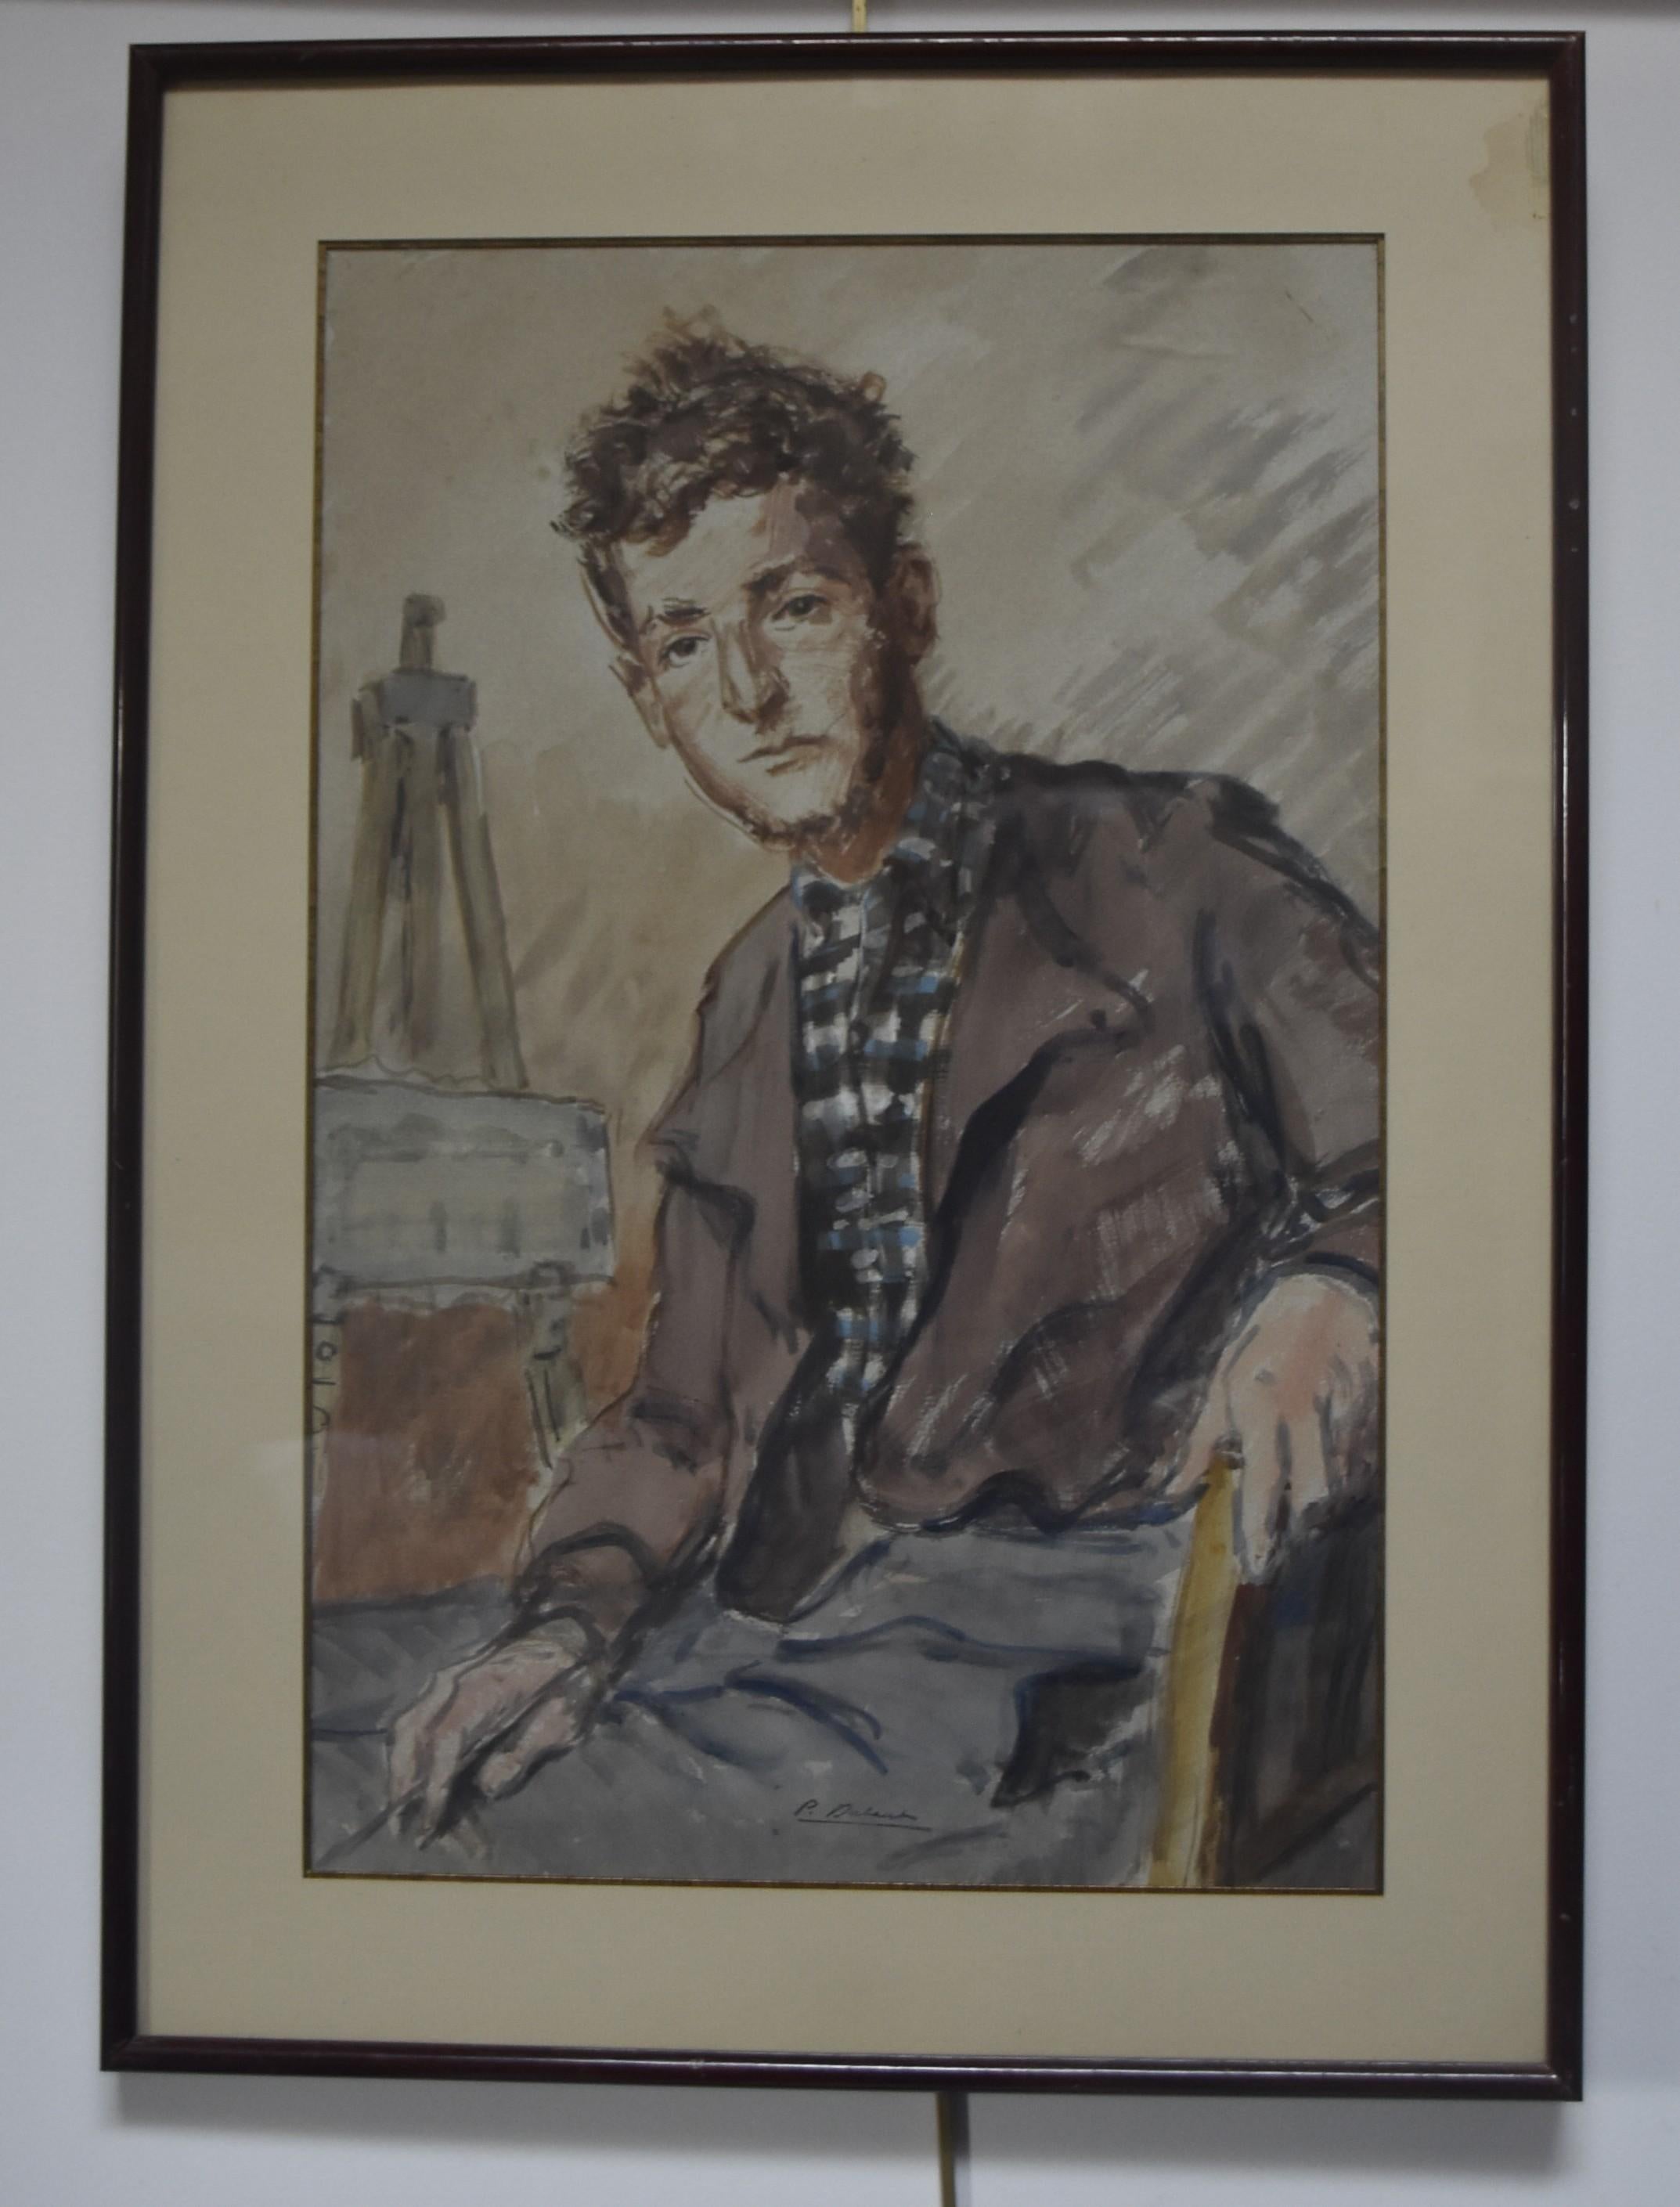 Pierre Olivier Dubaut (1886-1968) 
Portrait of an artist
Stamp of the artist on the lower part
watercolor on paper
46.5 x 30 cm

In a vintage frame : 58 x 42 cm, some damages in the mat at the uppper right, see detail photograph please.

Pierre